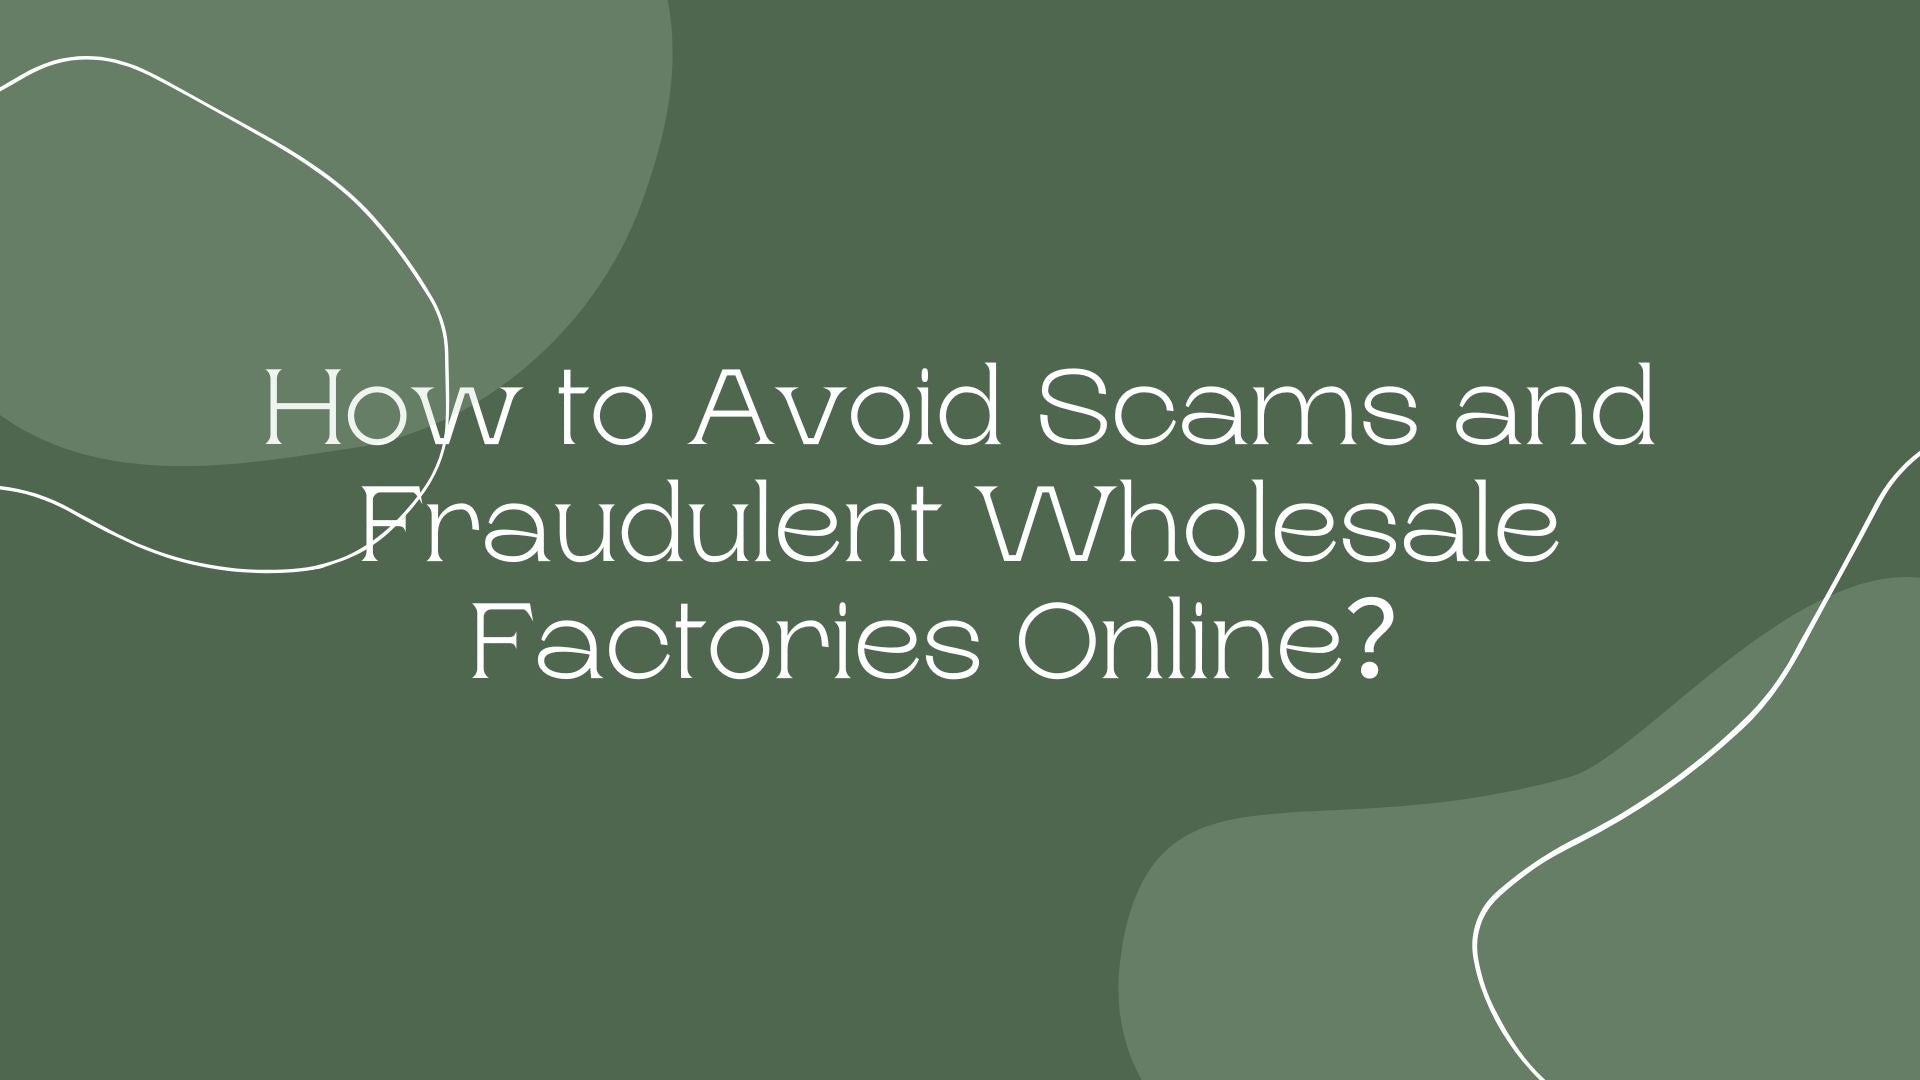 How to Avoid Scams and Fraudulent Wholesale Factories Online？